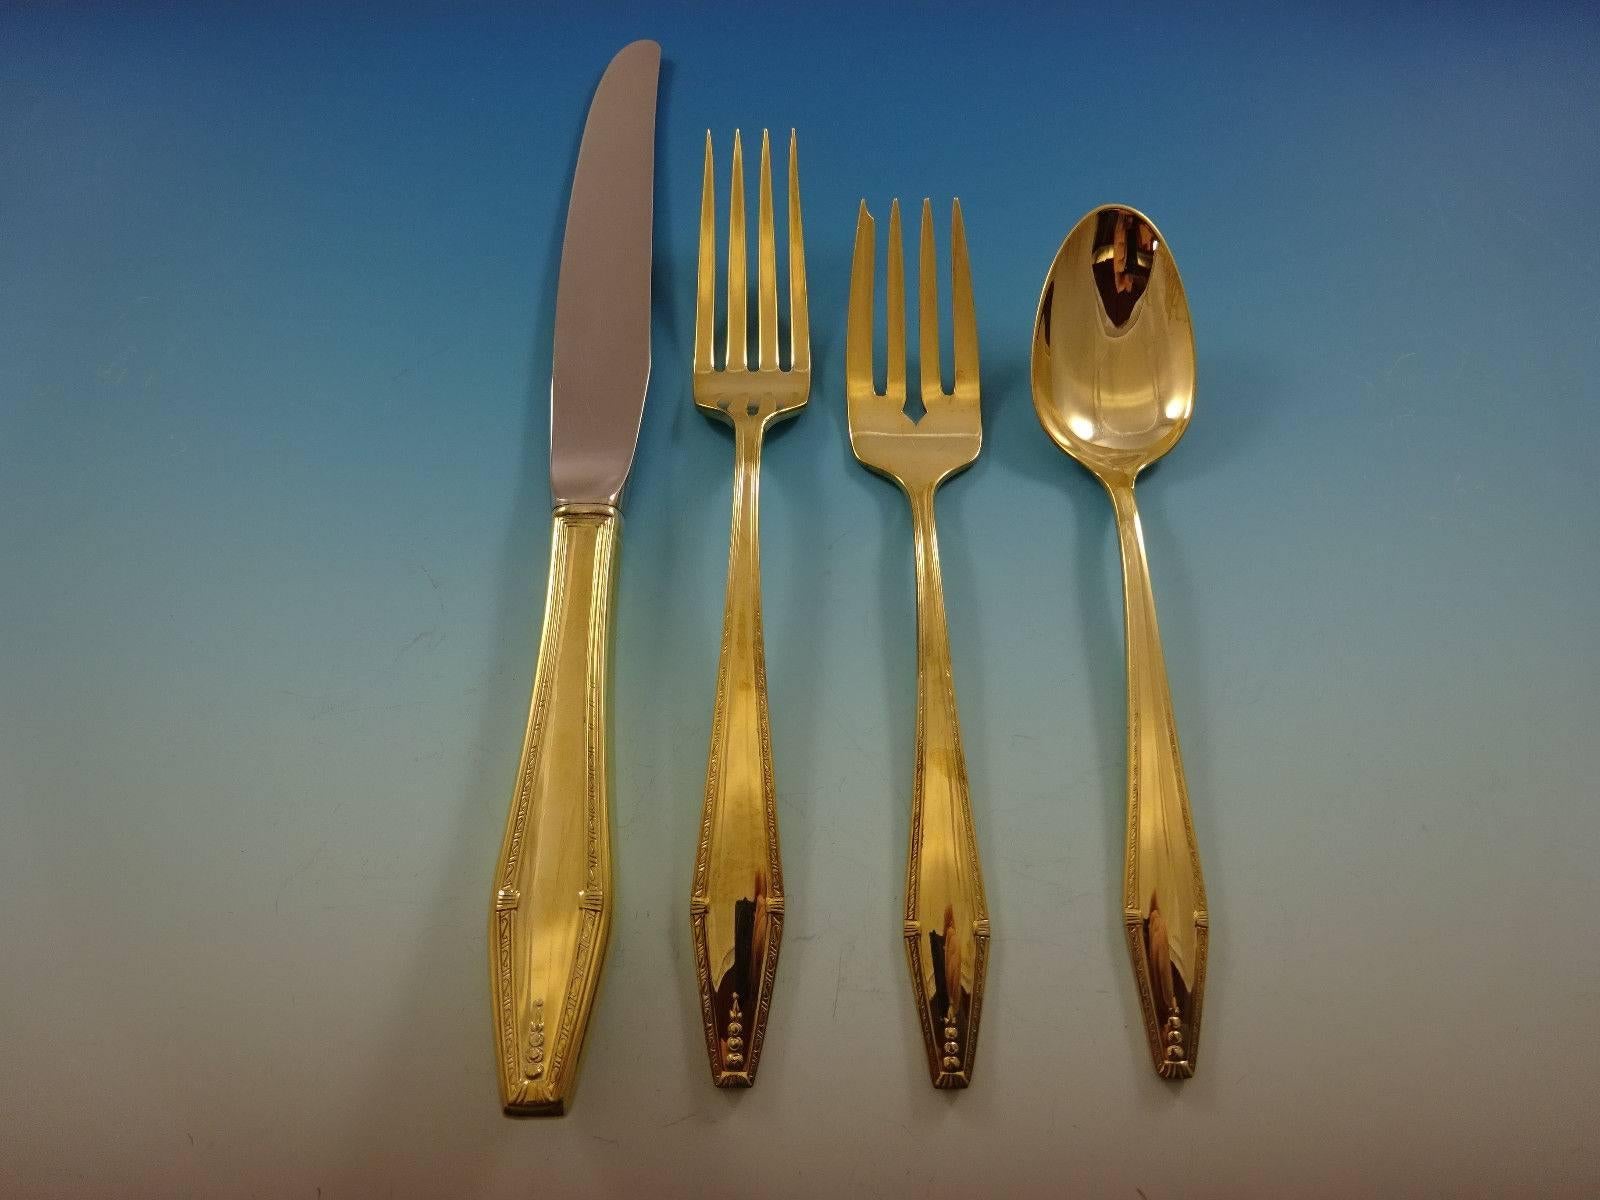 Formality by State House sterling silver flatware set - 48 pieces.  Gold flatware is on trend and makes a bold statement on your table, especially when paired with gold-rimmed China and gold accents. This set is vermeil (completely gold-washed) and